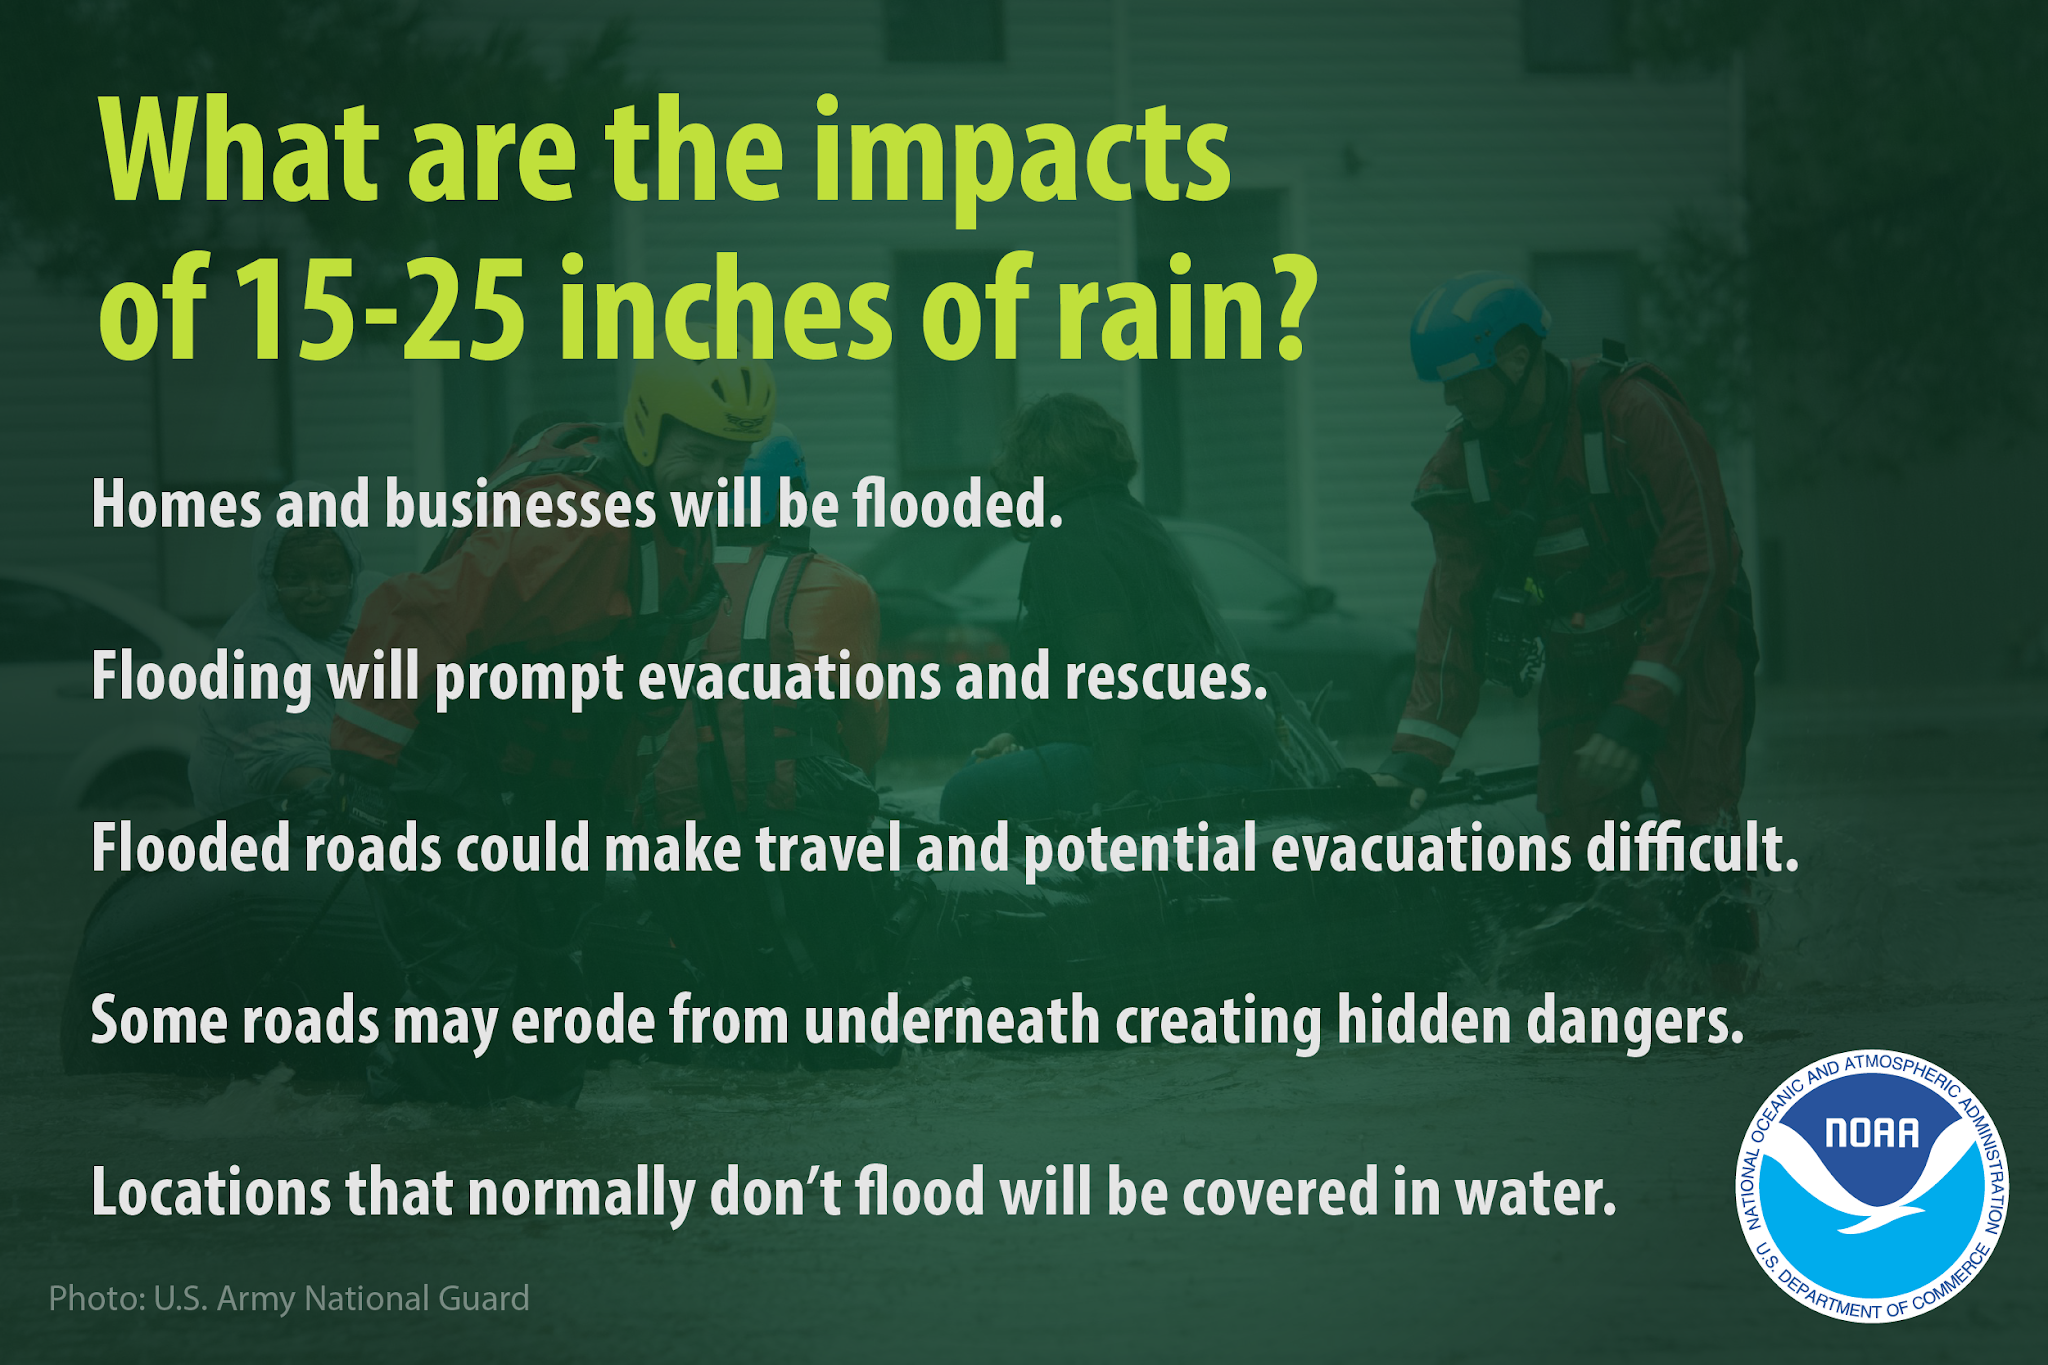 What are the impacts of 15-25 inches of rain? Homes and businesses will be flooded. Flooding will prompt evacuations and rescues. Flooded roads could make travel and potential evacuations difficult. Some roads may erode from underneath, creating hidden dangers. Locations that don't normally flood will be covered in water.